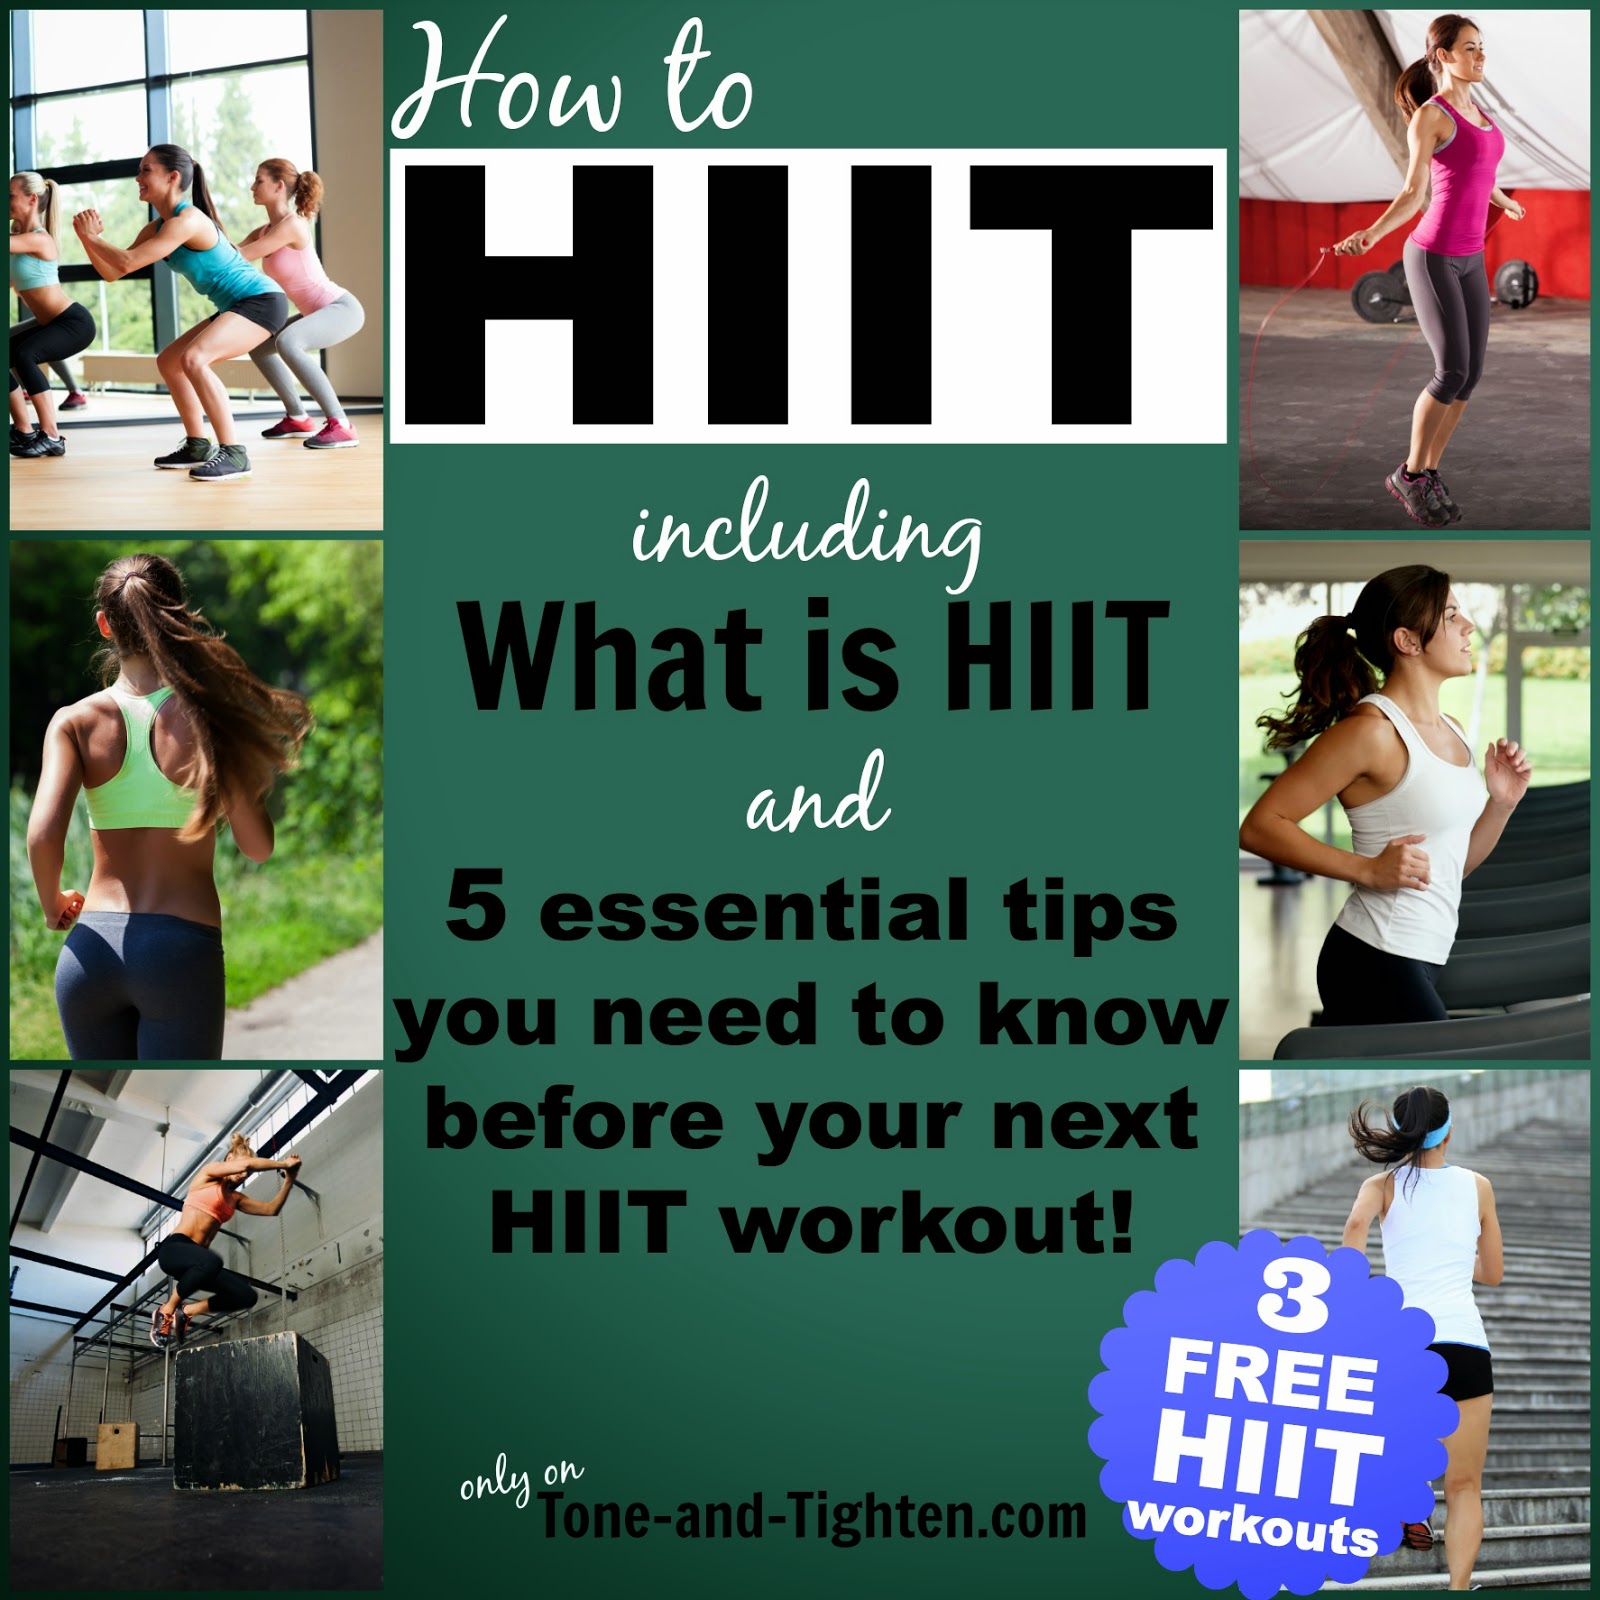 How To HIIT – All the tips and tricks for you to successfully shred high intensity interval training – What is HIIT